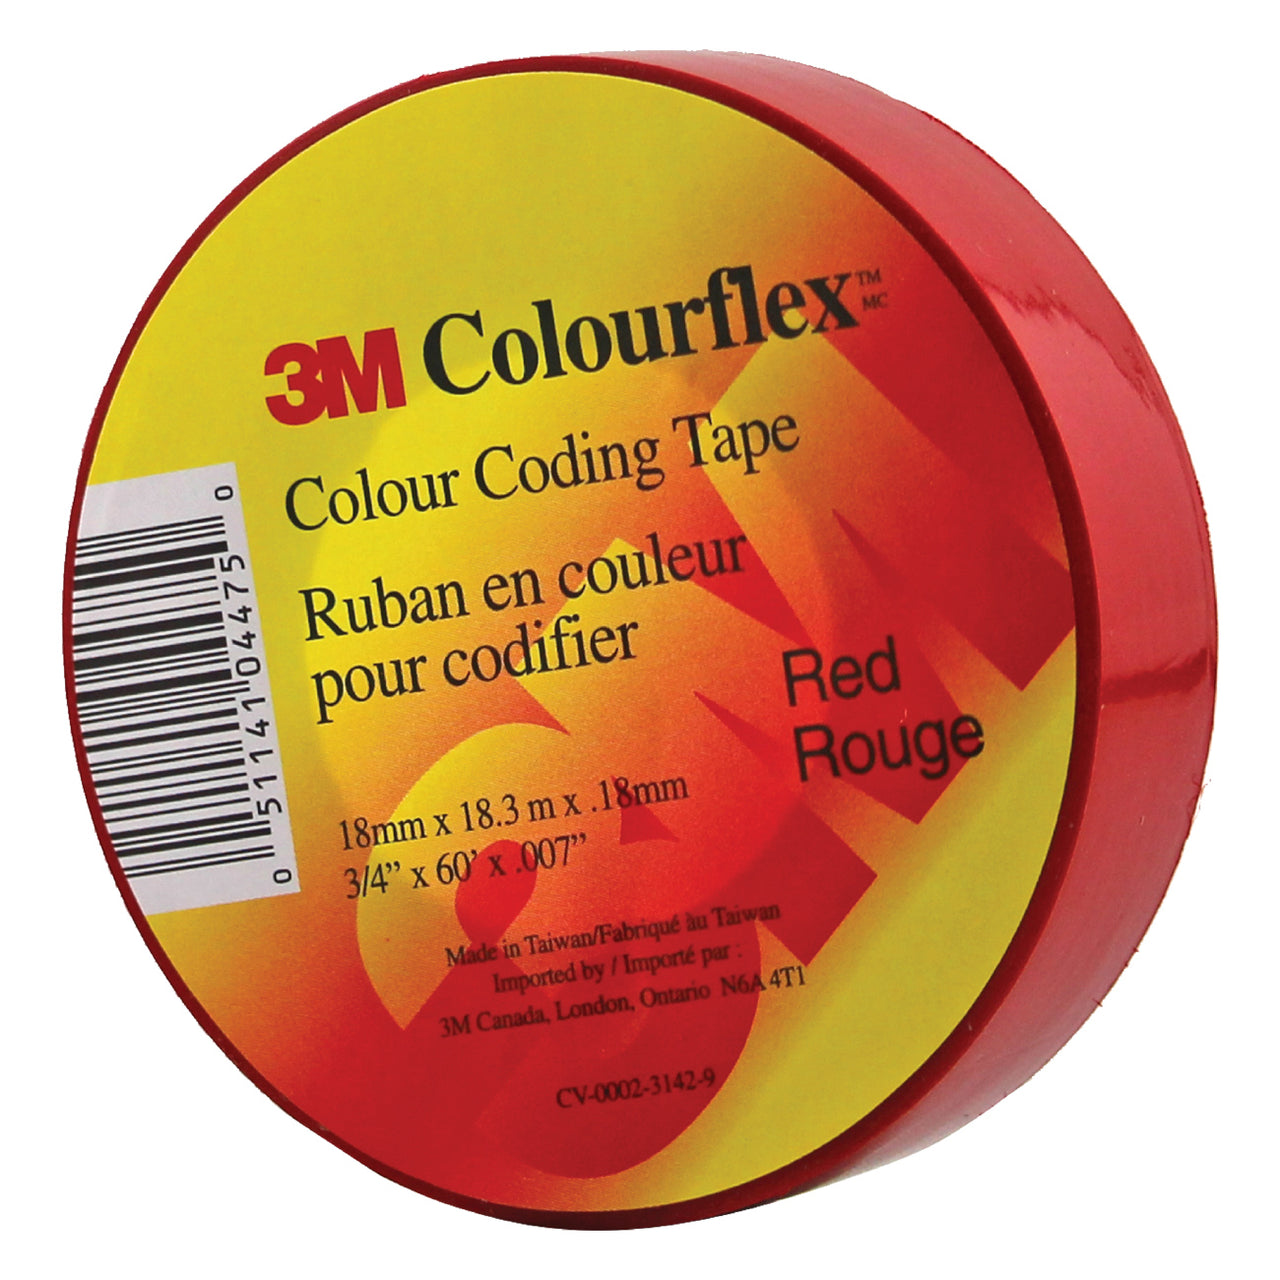 3M Colourflex Coding Tape 3/4X60 (Red) - Wound Dressing 3M - Canada